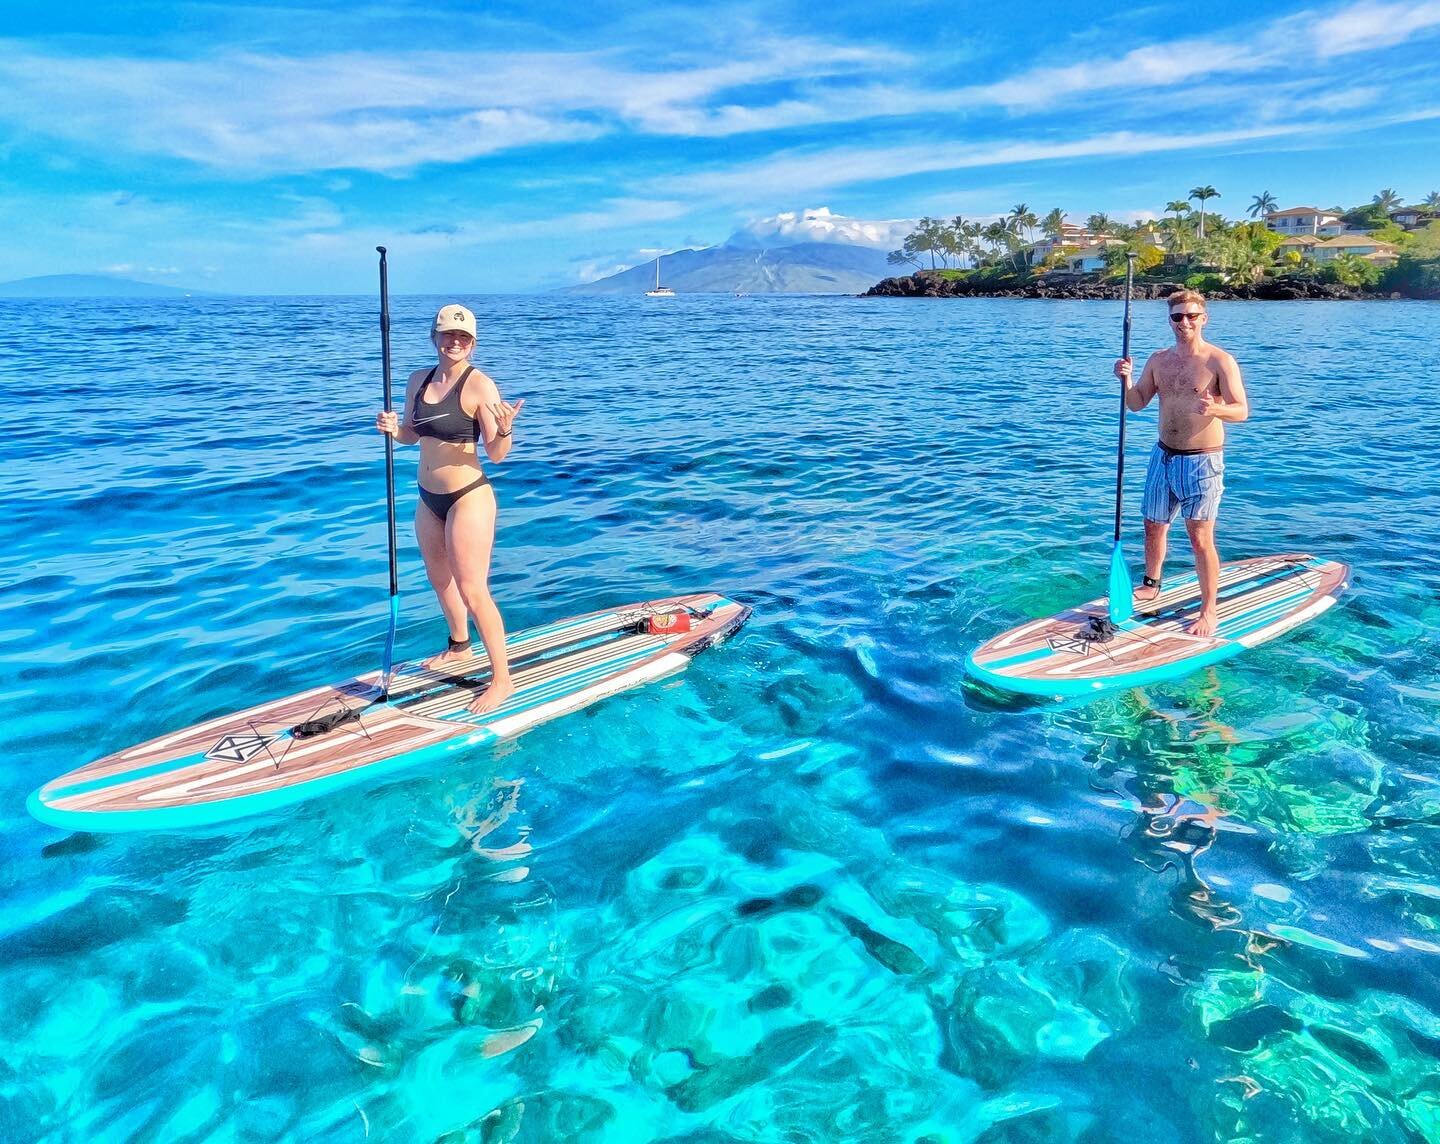 😎 Epic day on the water with Anna &amp; Ryan from the West Coast!! Crystal clear water, turtles playing, and great vibes all around! 💦 

#maui #mauihawaii #hawaii #sup #mauisup #mauivacation #mauitrip #mauitour #mauibeach #wailea #kihei #mauithings